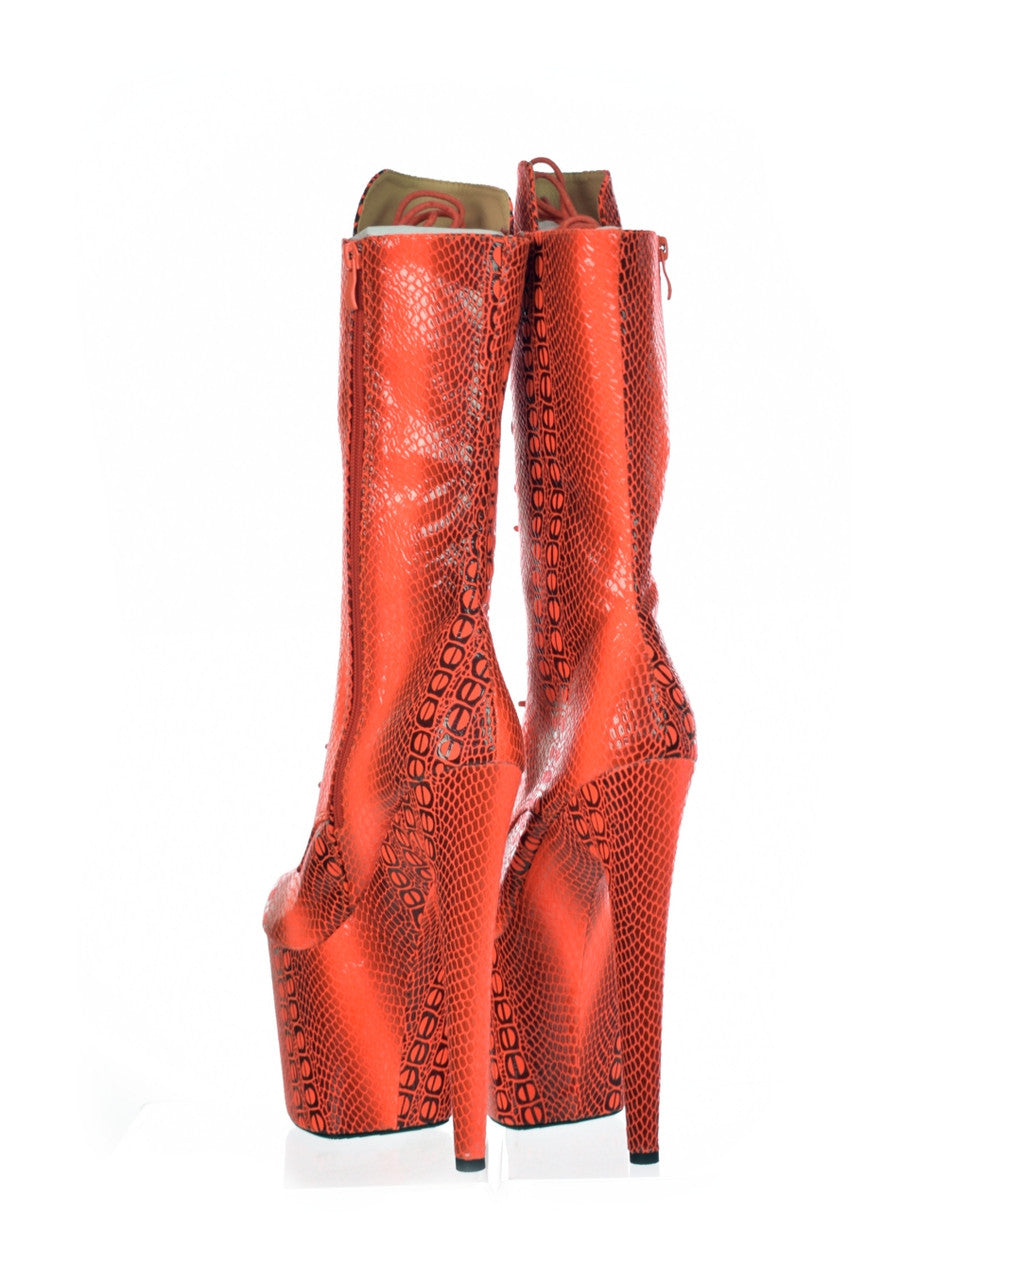 Dragpole Shoes Red Platform 8inch boot